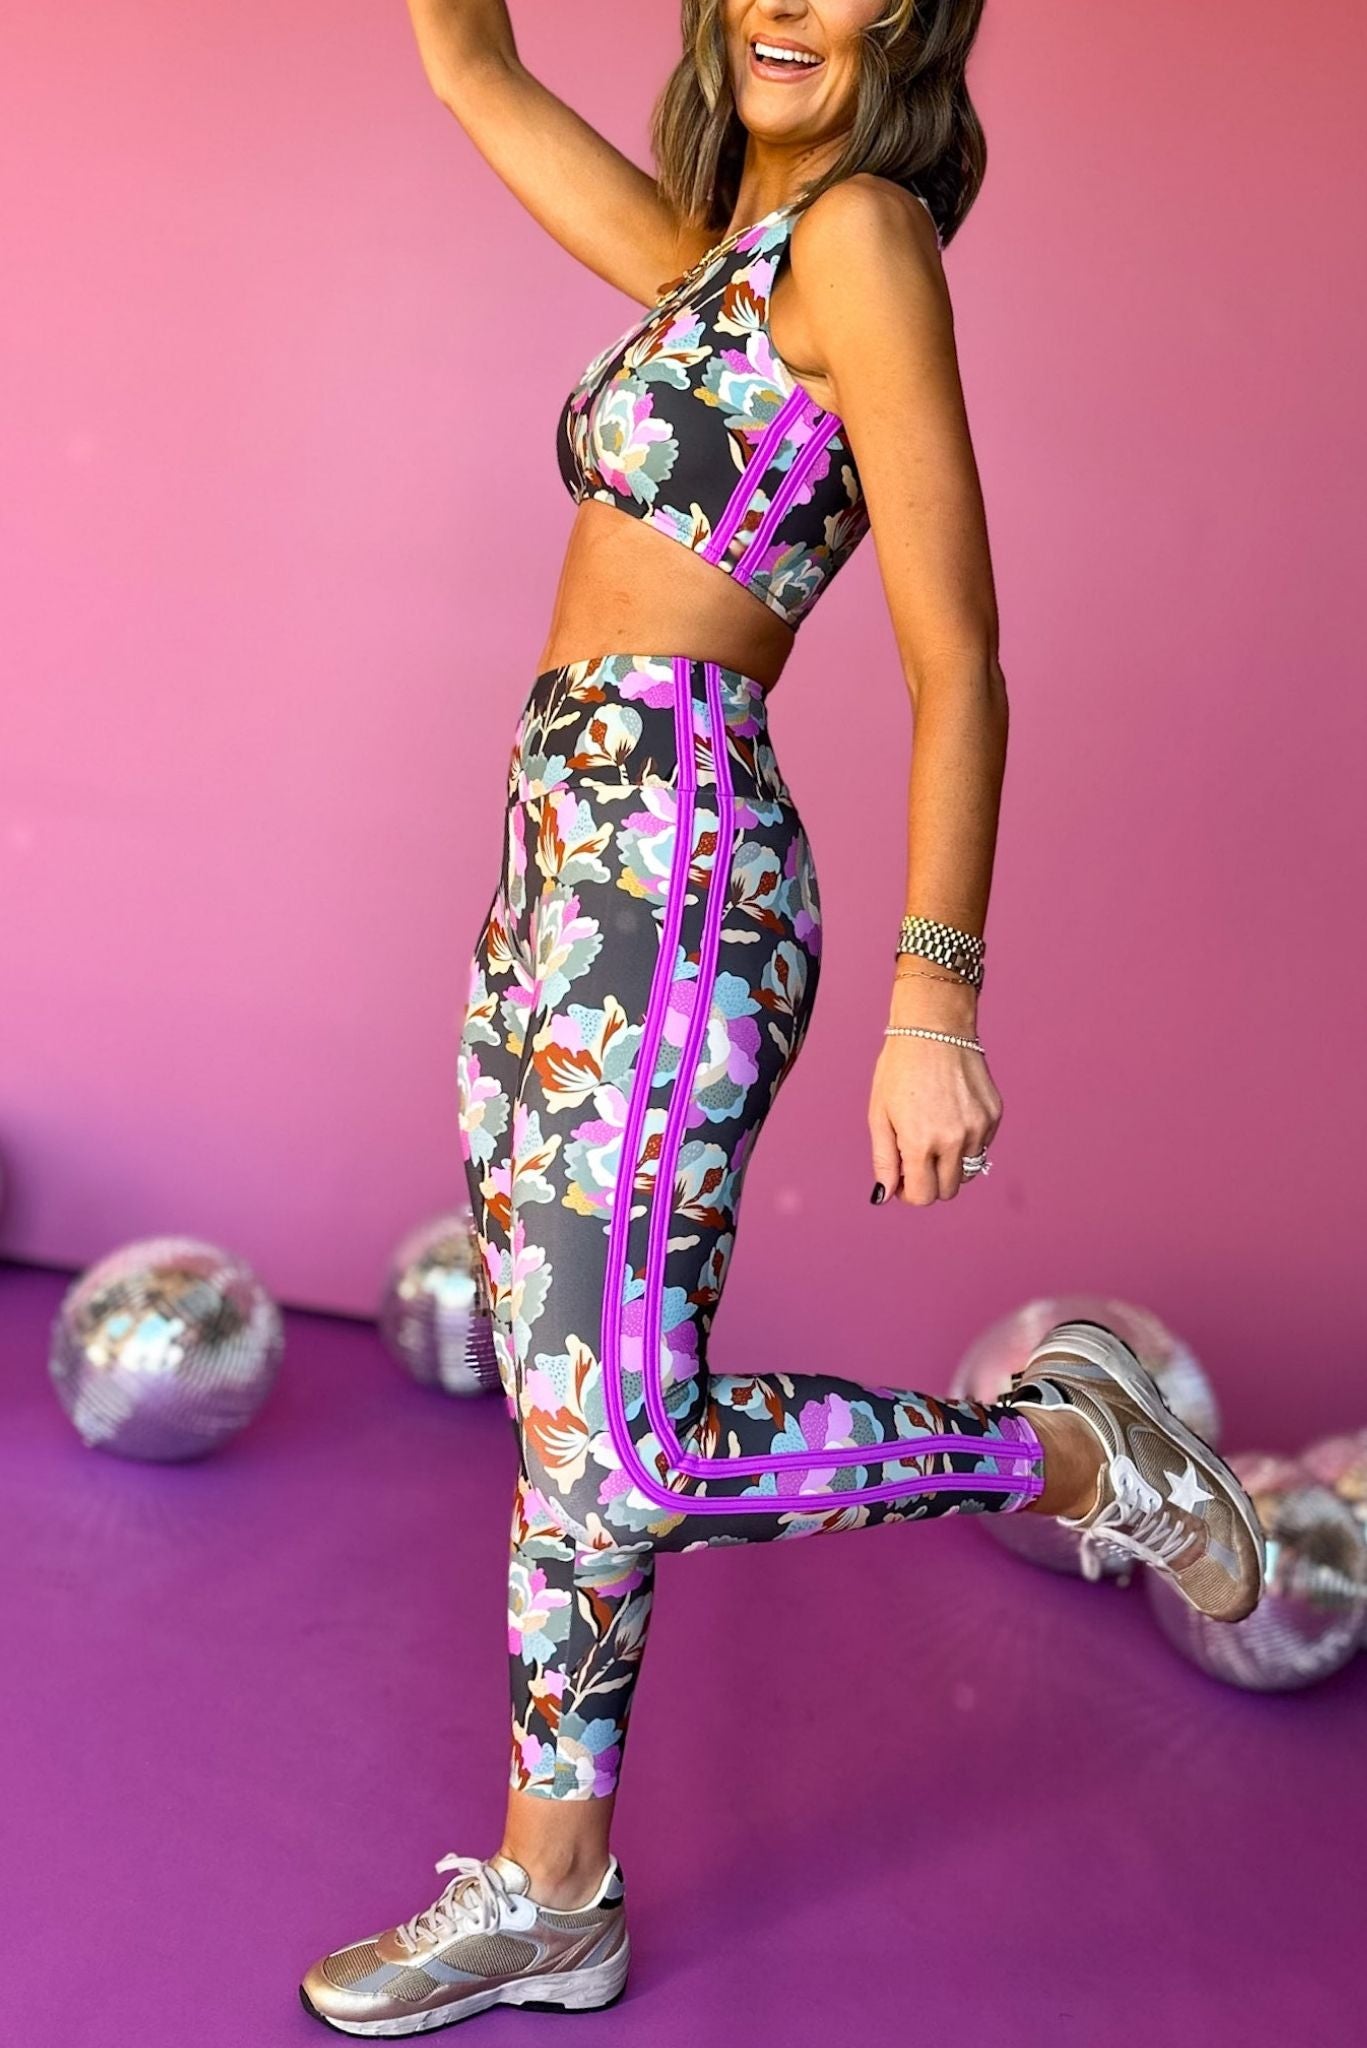 SSYS Sage Magenta Floral Compression Leggings With Magenta Racing Stripes, must have leggings, must have athleisure, elevated style, elevated athleisure, mom style, active style, active wear, fall athleisure, fall style, comfortable style, elevated comfort, shop style your senses by mallory fitzsimmons